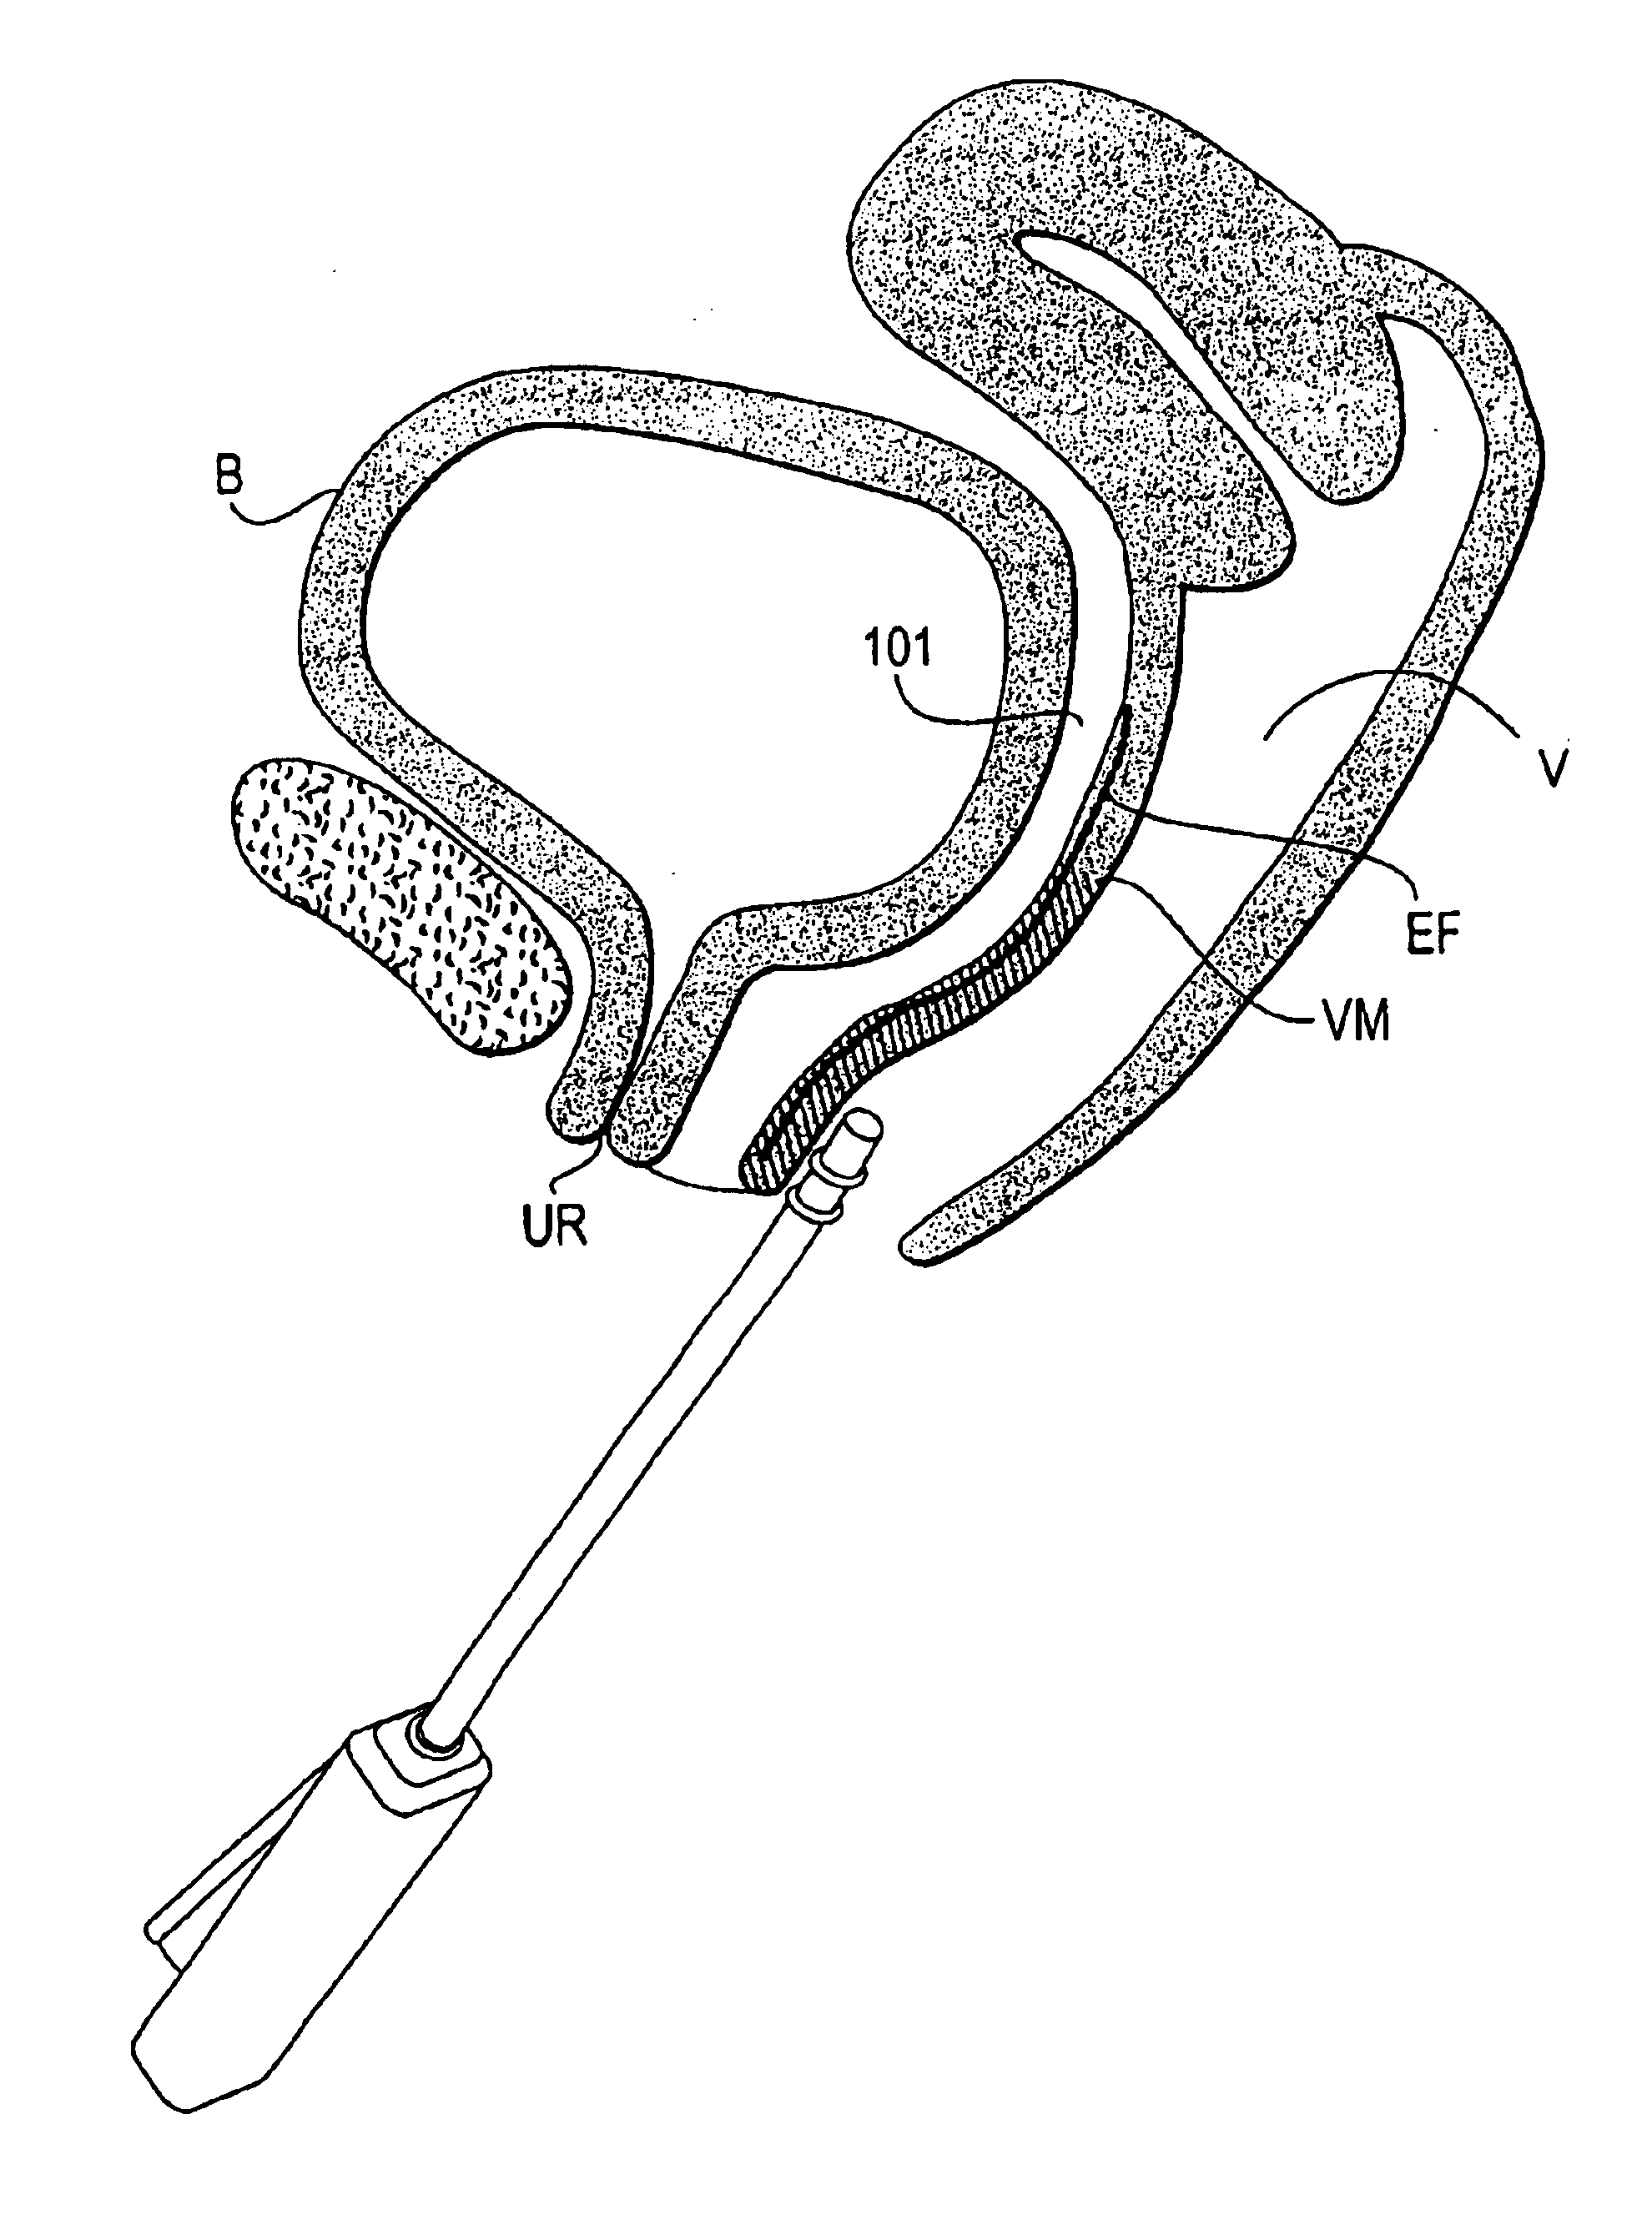 Systems and methods using vasoconstriction for improved thermal treatment of tissues